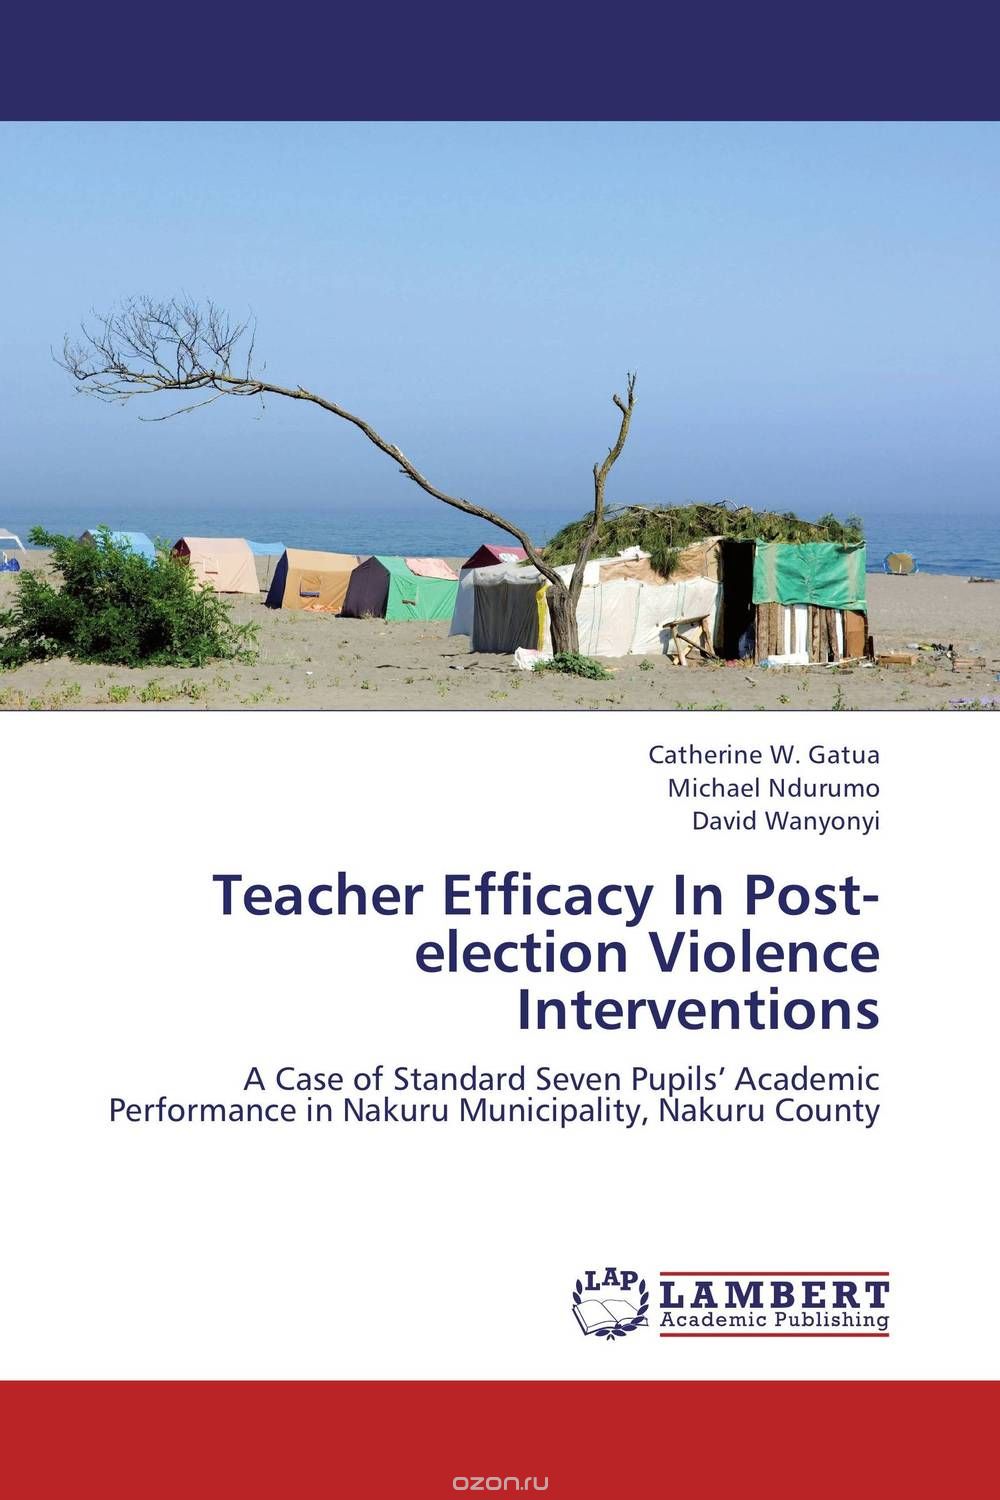 Teacher Efficacy In Post-election Violence Interventions